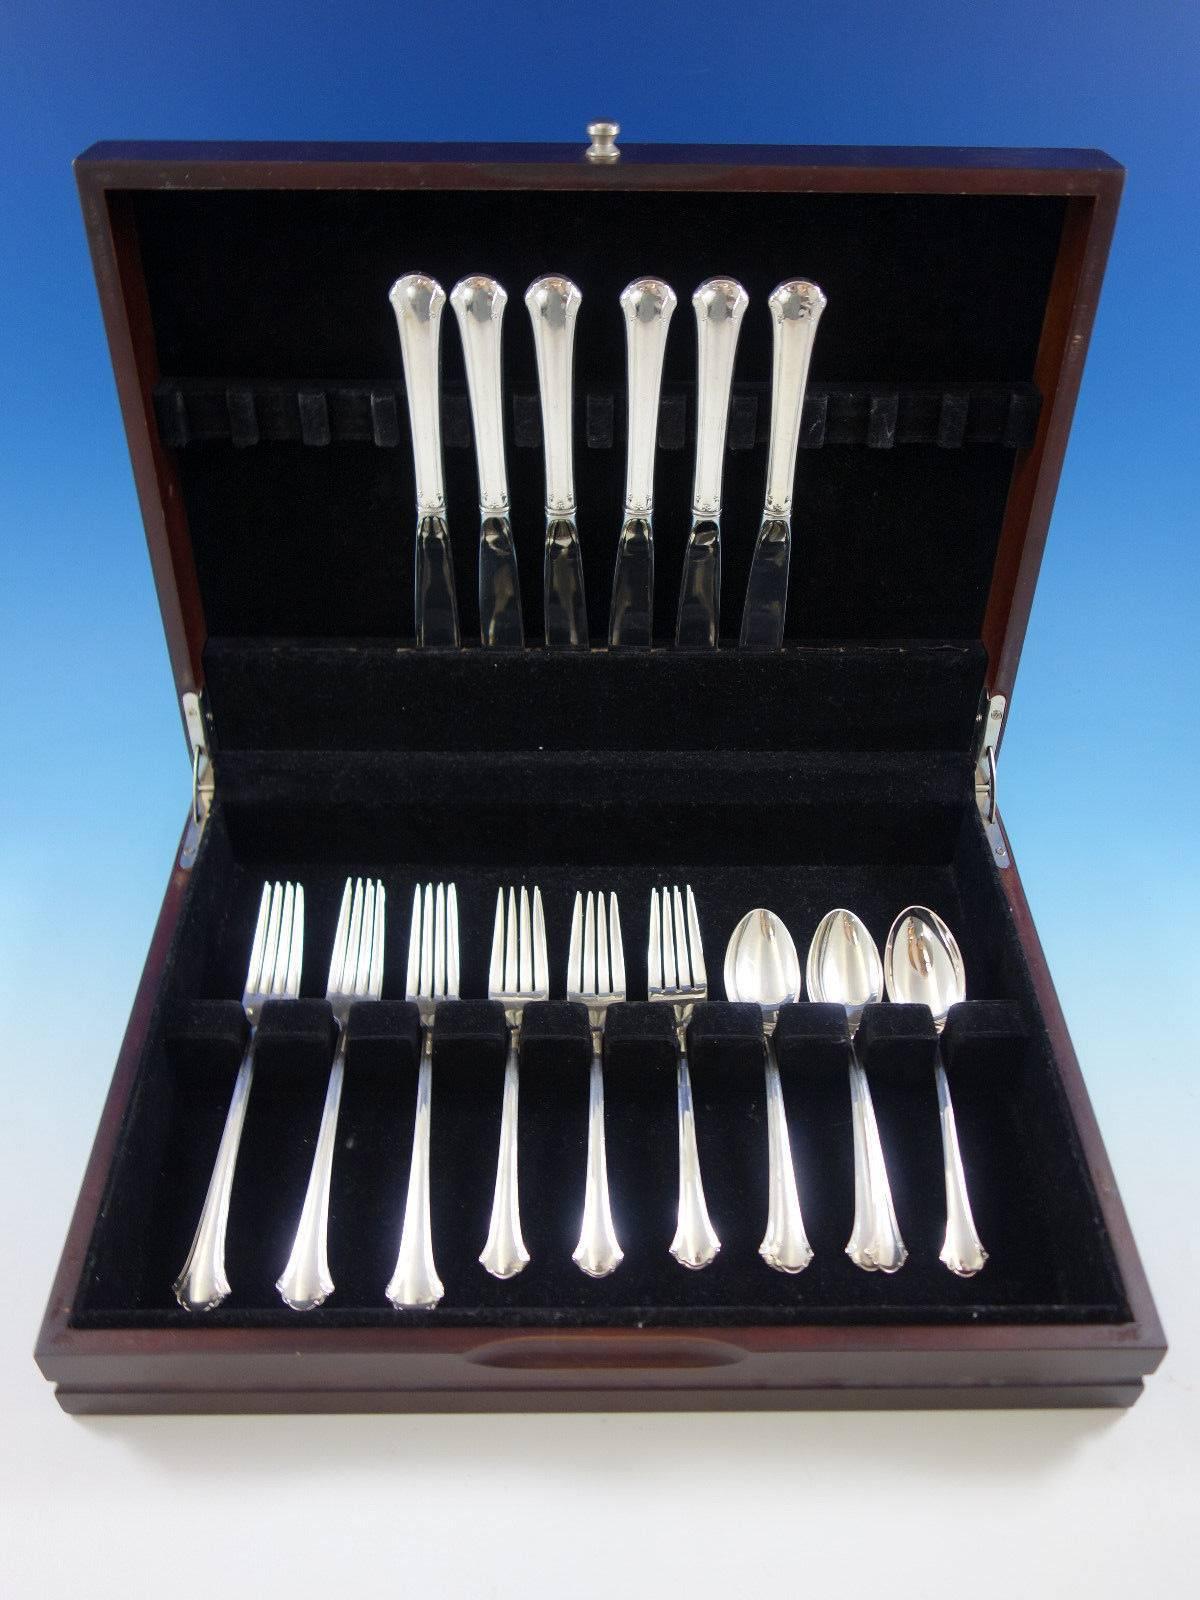 Chippendale by towle sterling silver flatware set - 24 pieces. Great starter set! This set includes: 

six knives, 8 3/4